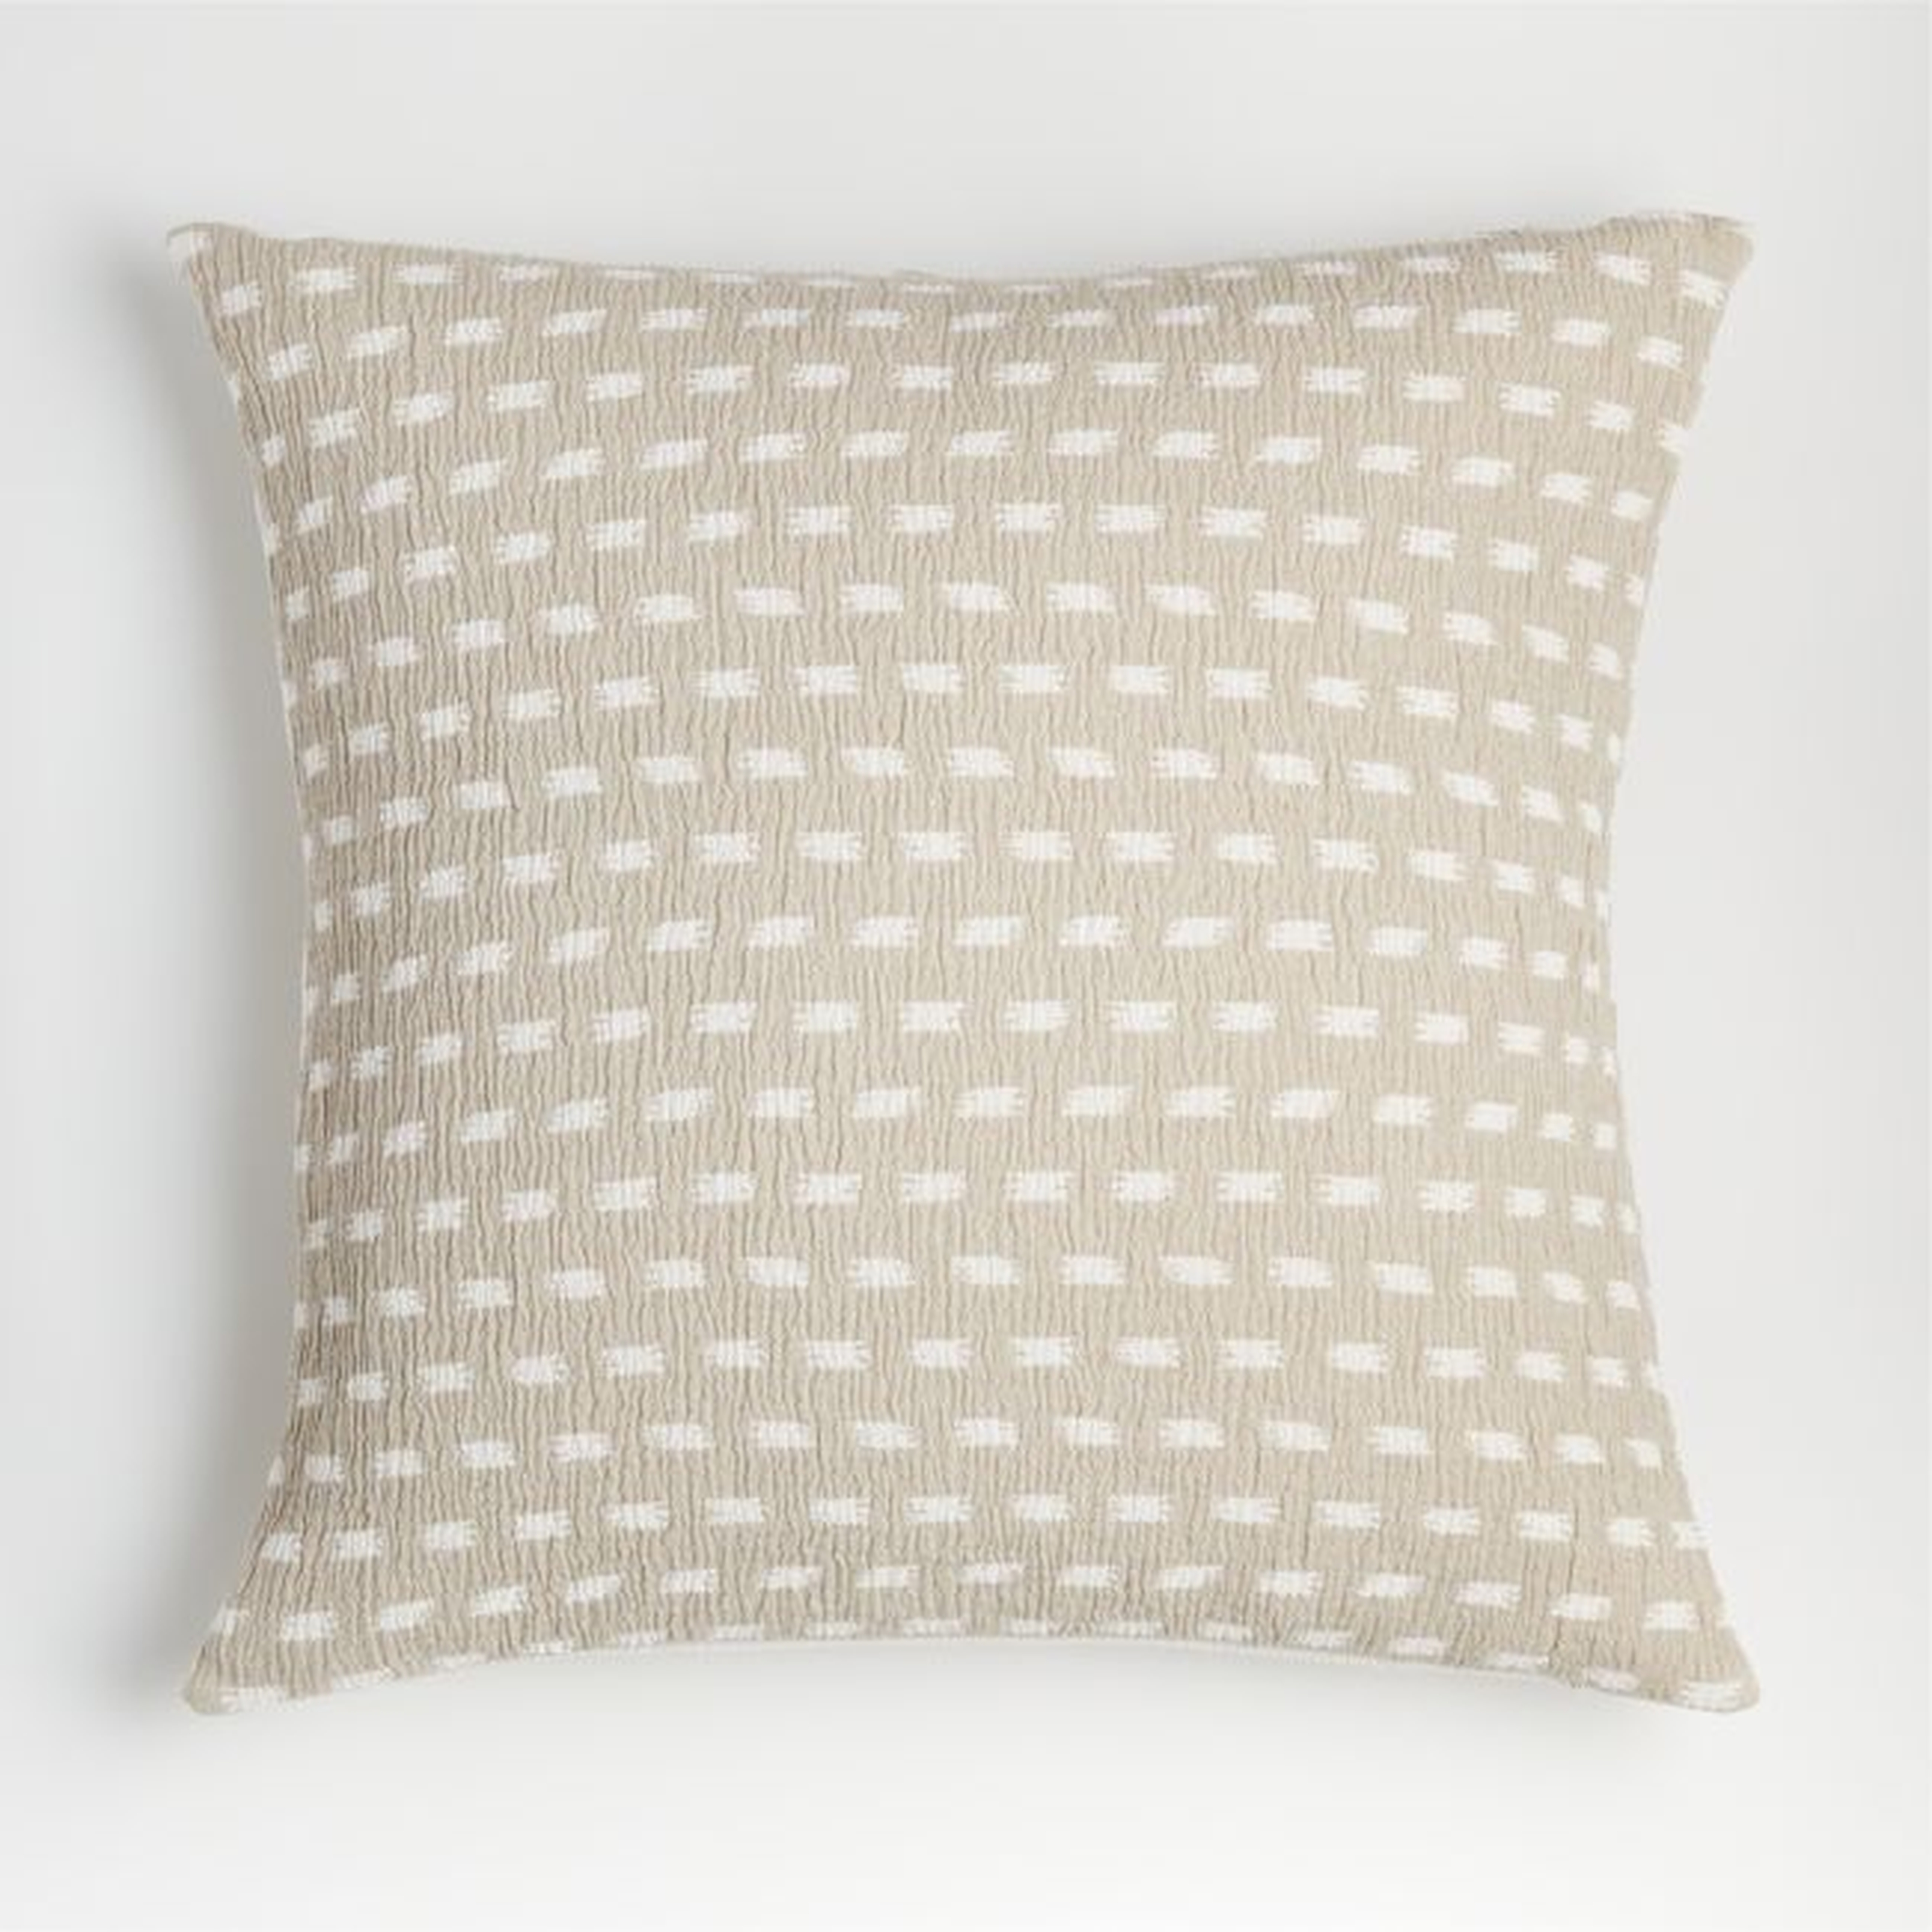 Mujia 23" Reversible Ivory Ikat Pillow Cover - Crate and Barrel